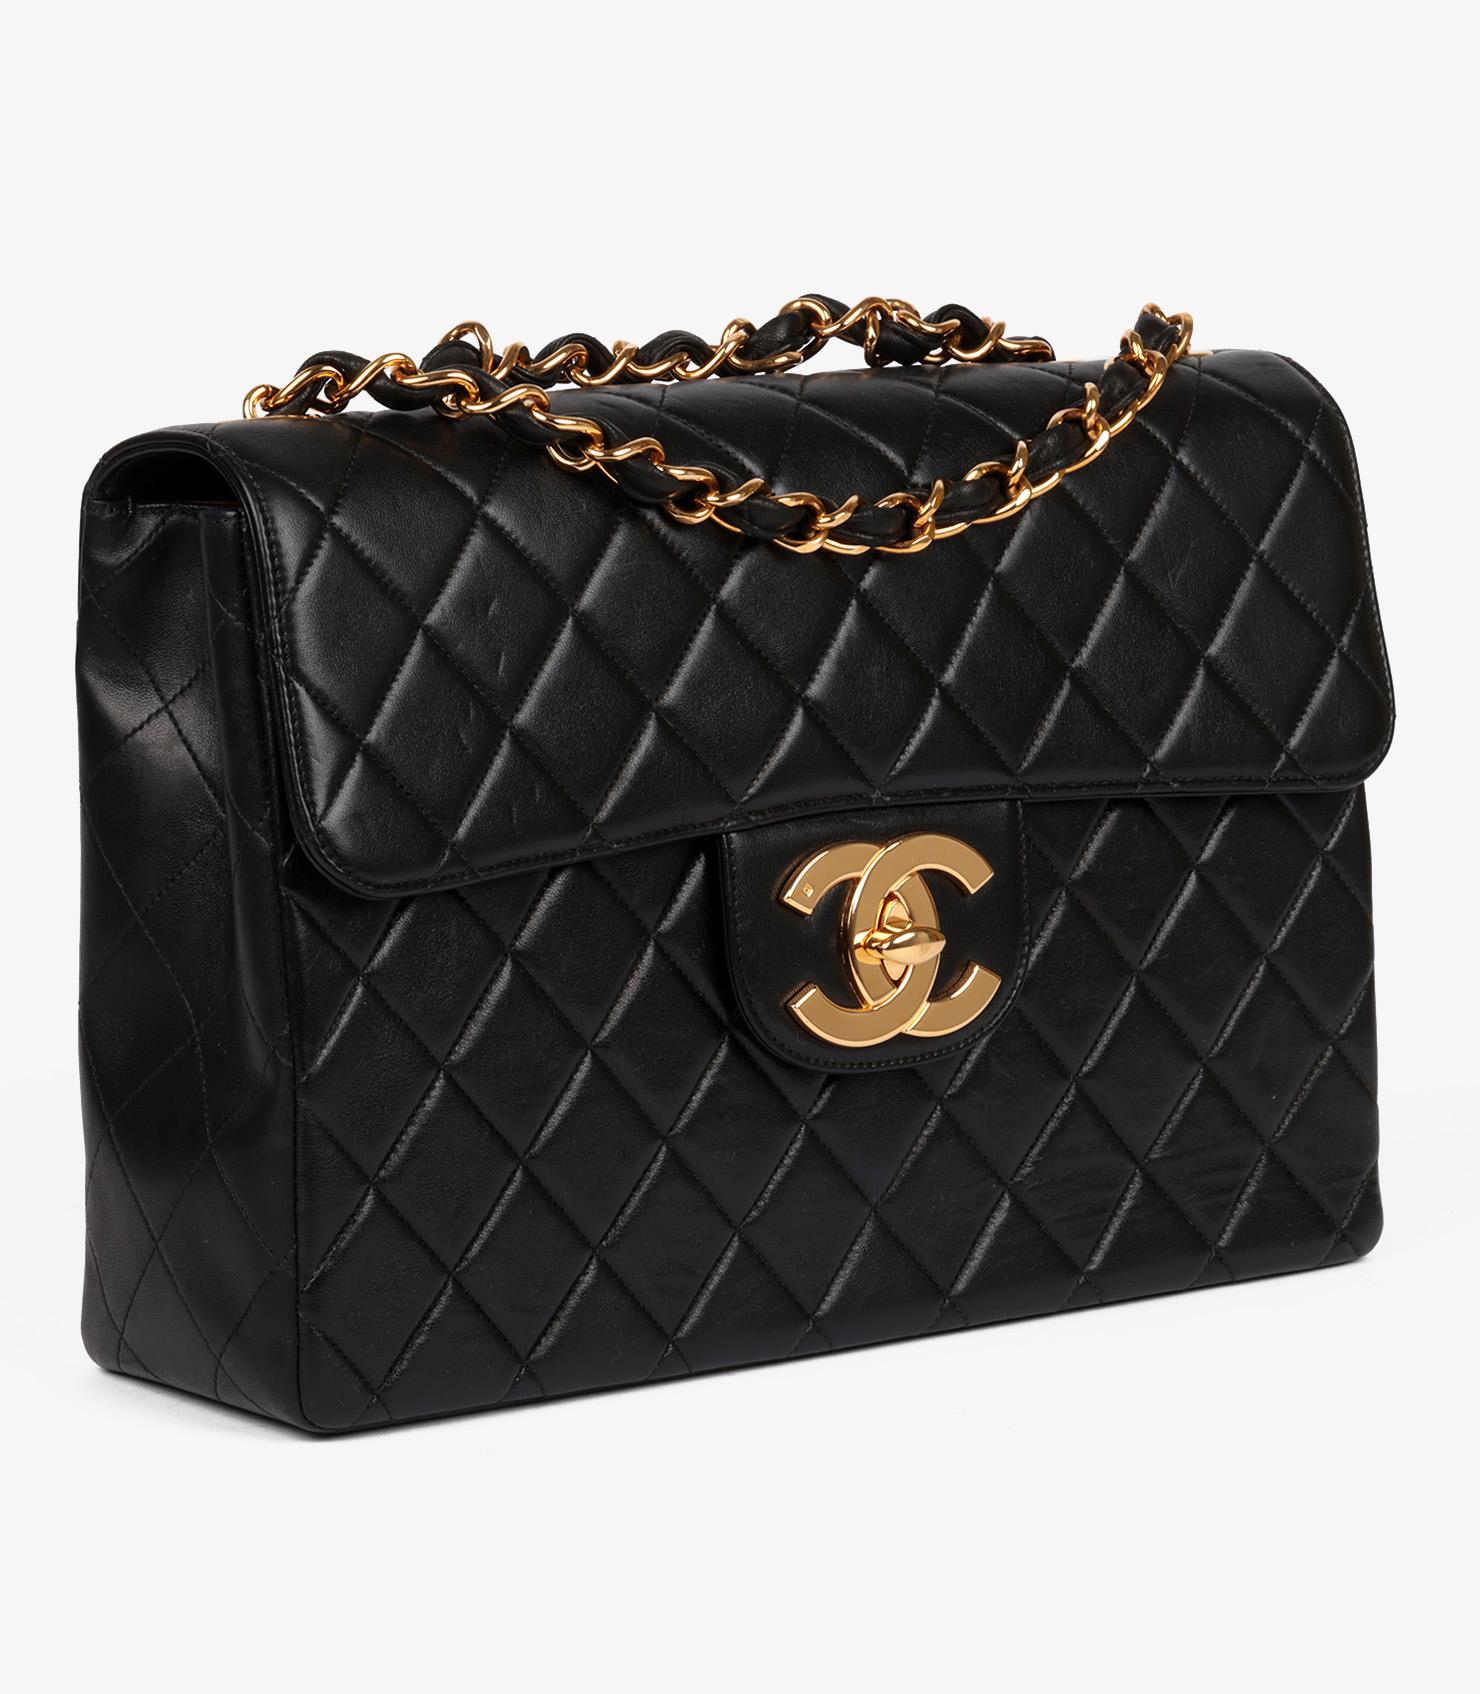 Chanel Black Quilted Lambskin Vintage Maxi Jumbo XL Classic Single Flap Bag In Excellent Condition For Sale In Bishop's Stortford, Hertfordshire